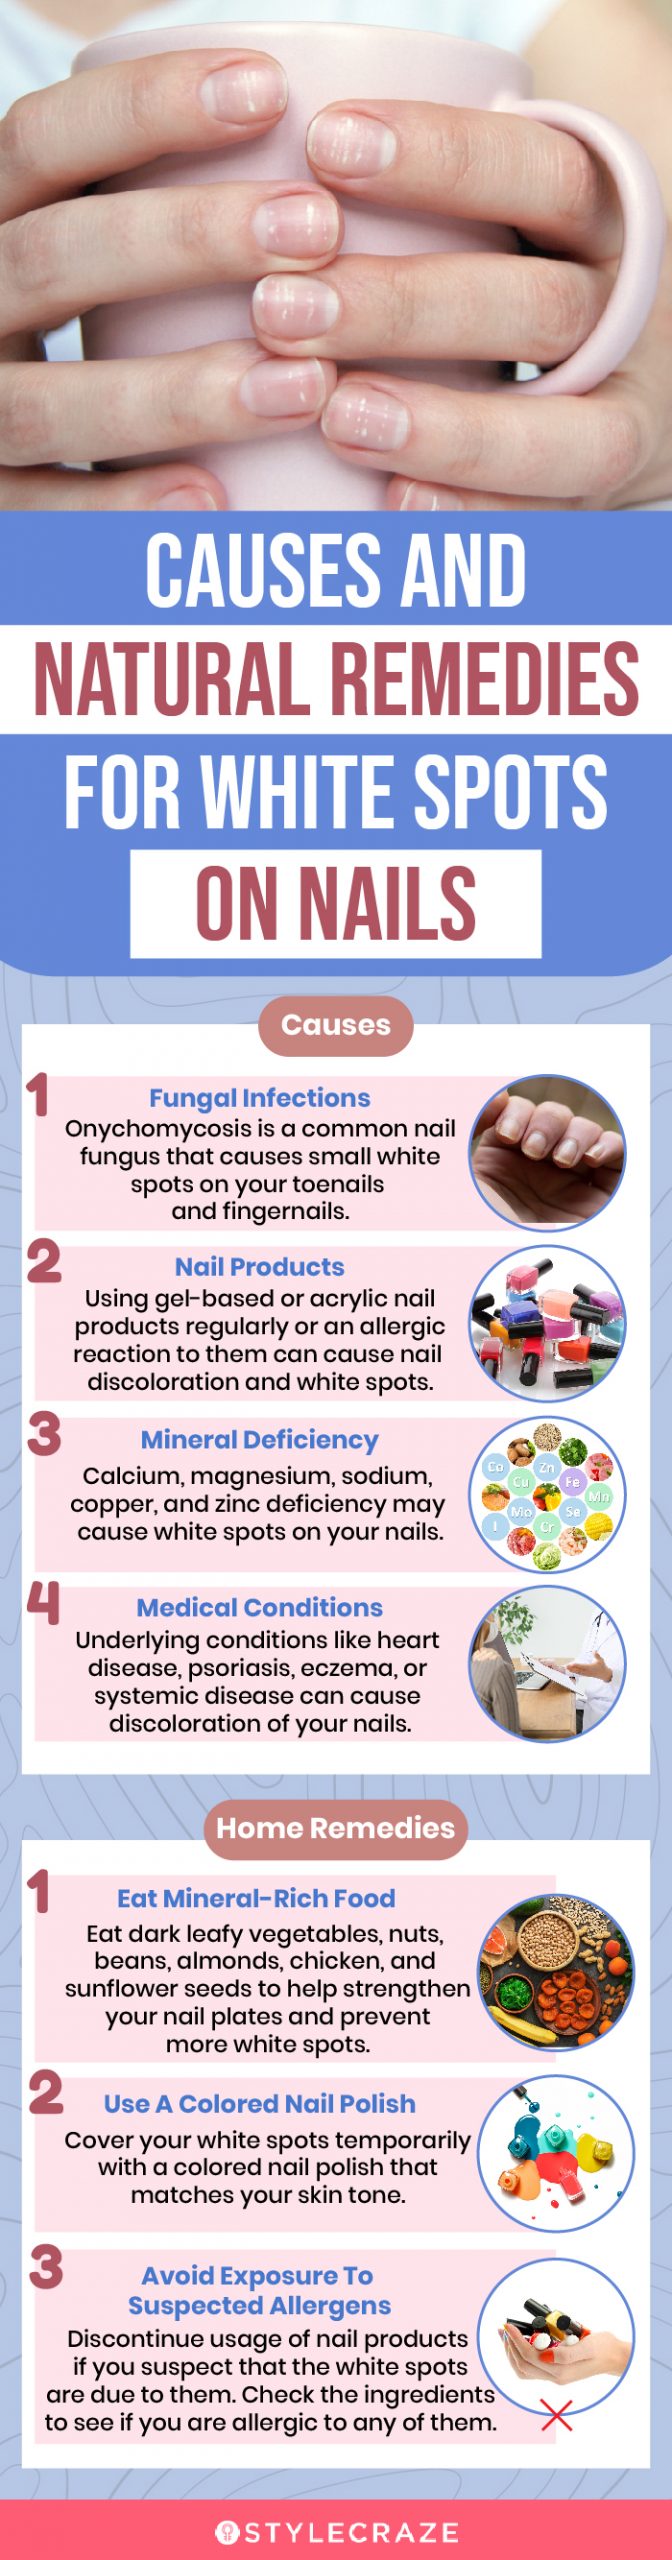 Ways You Didn't Realize You Were Ruining Your Fingernails